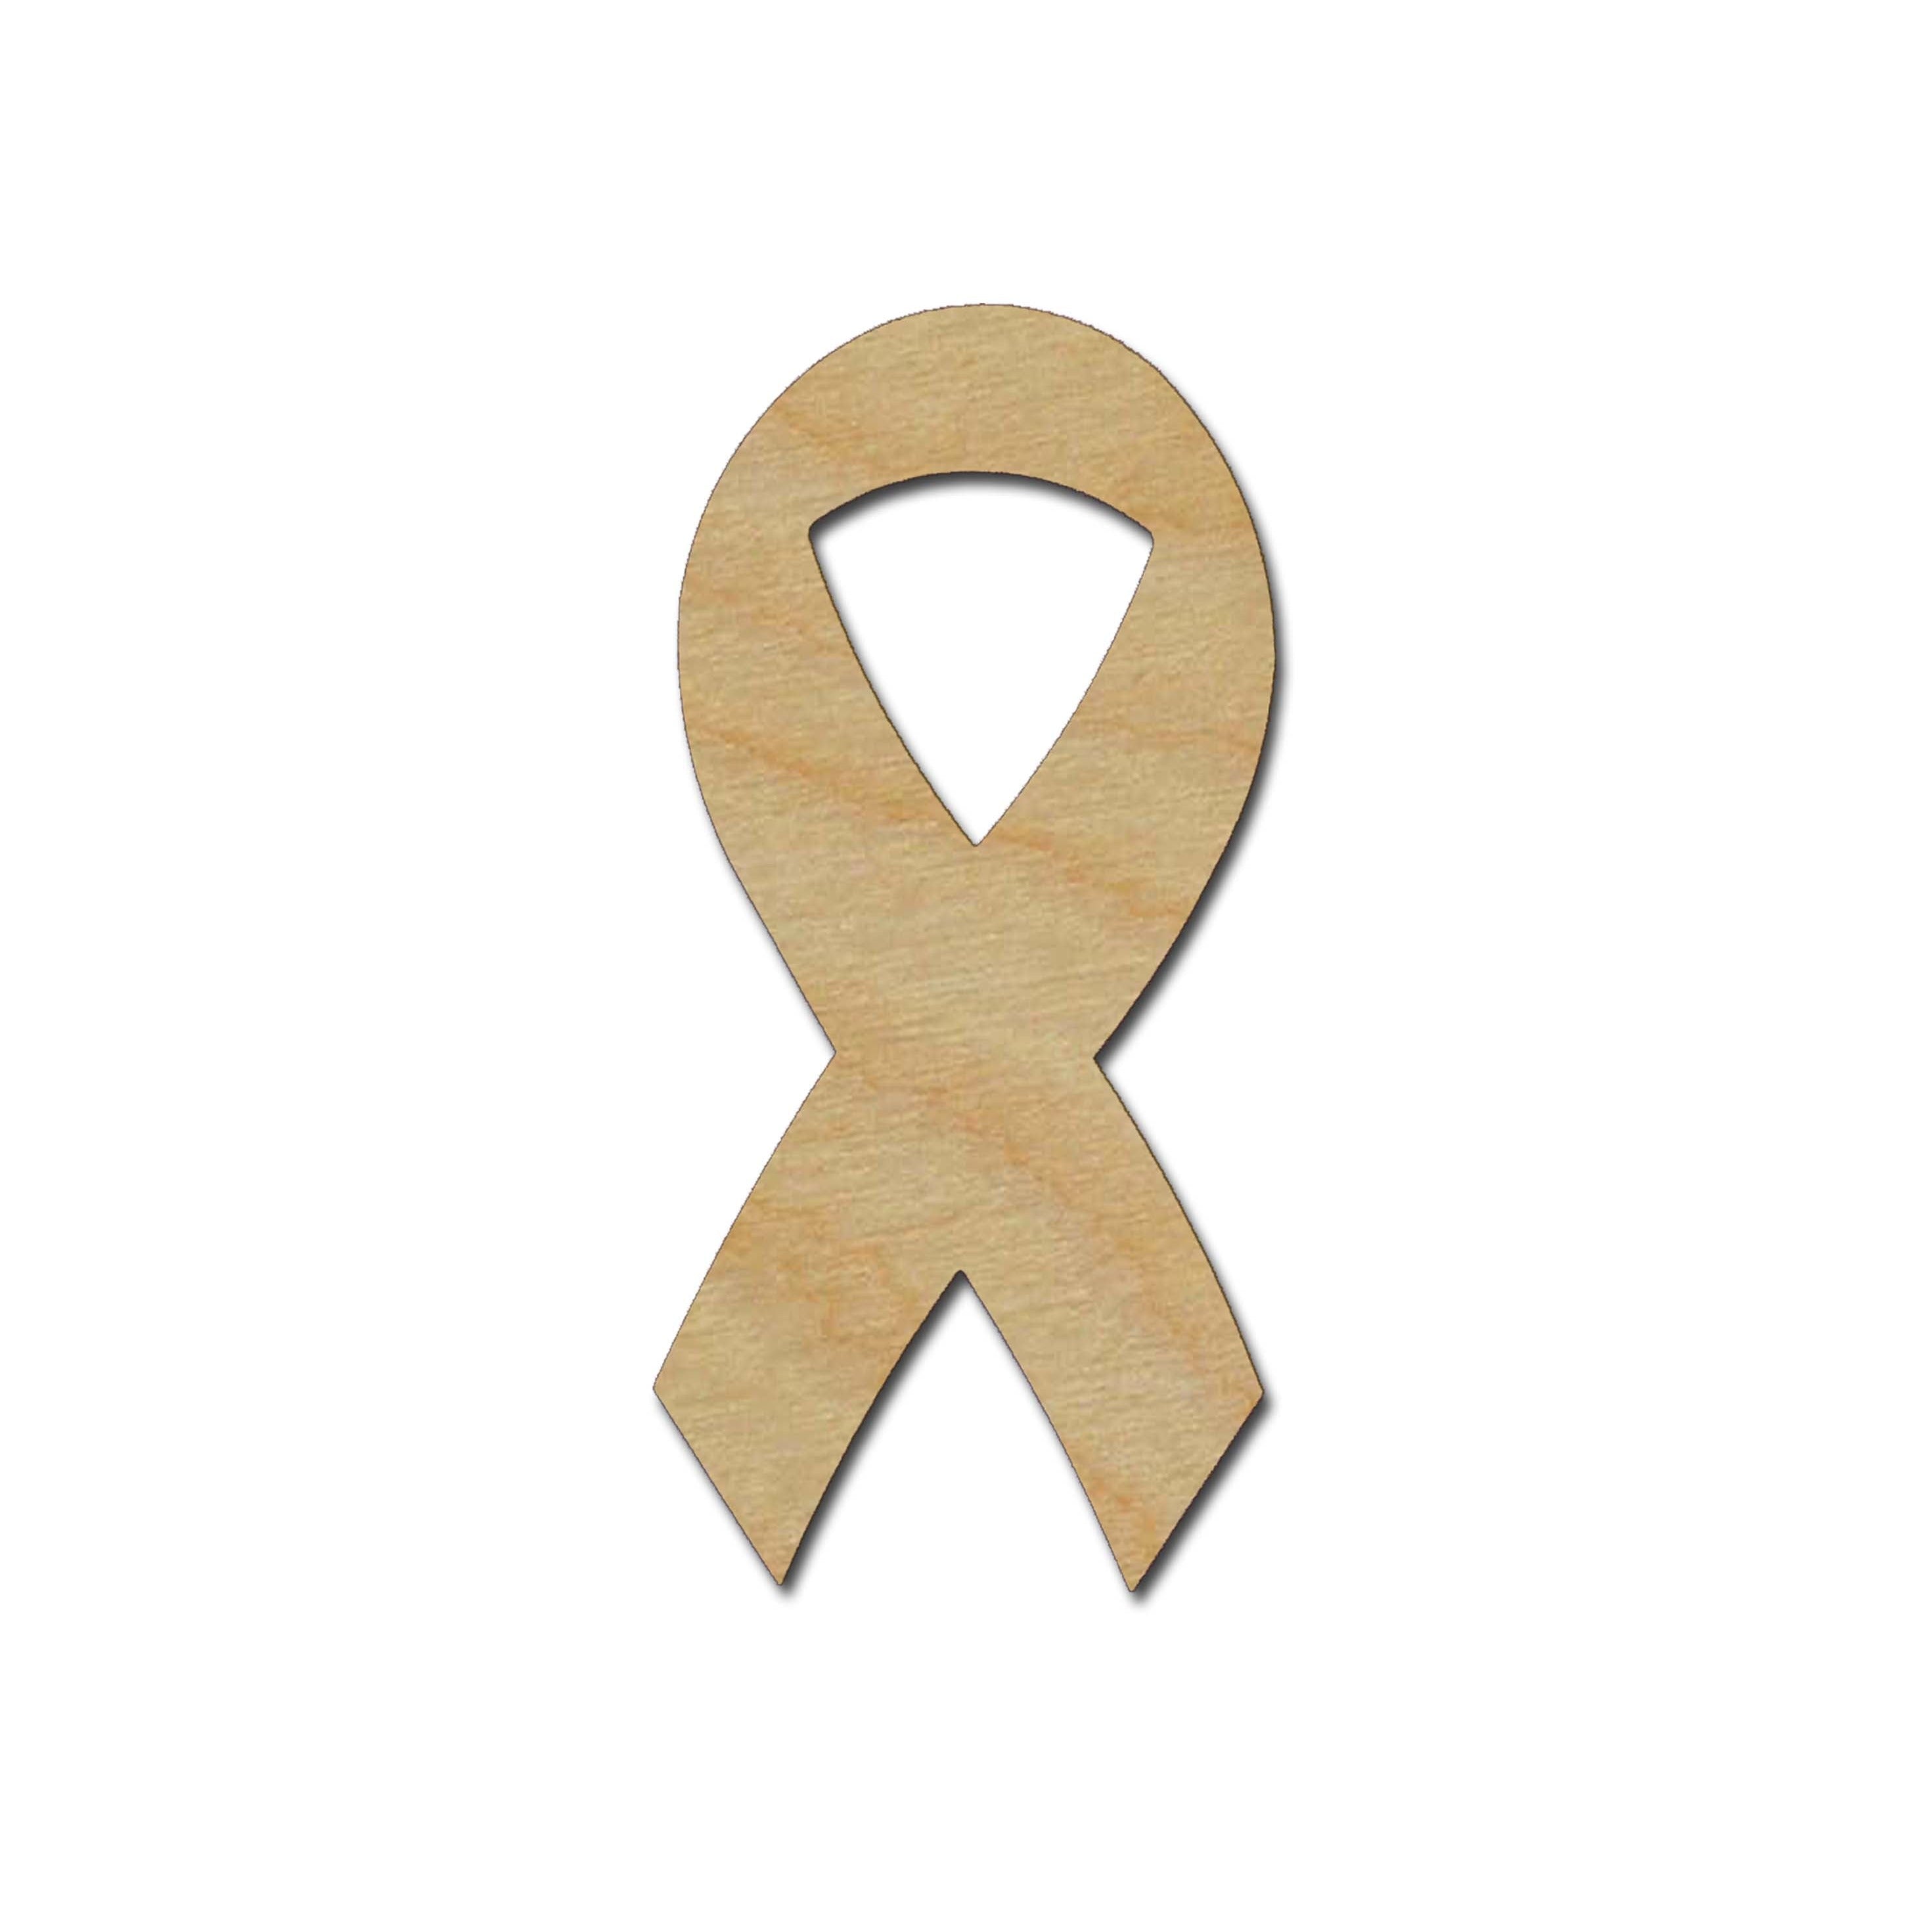 Support Ribbon Wood Cut Outs